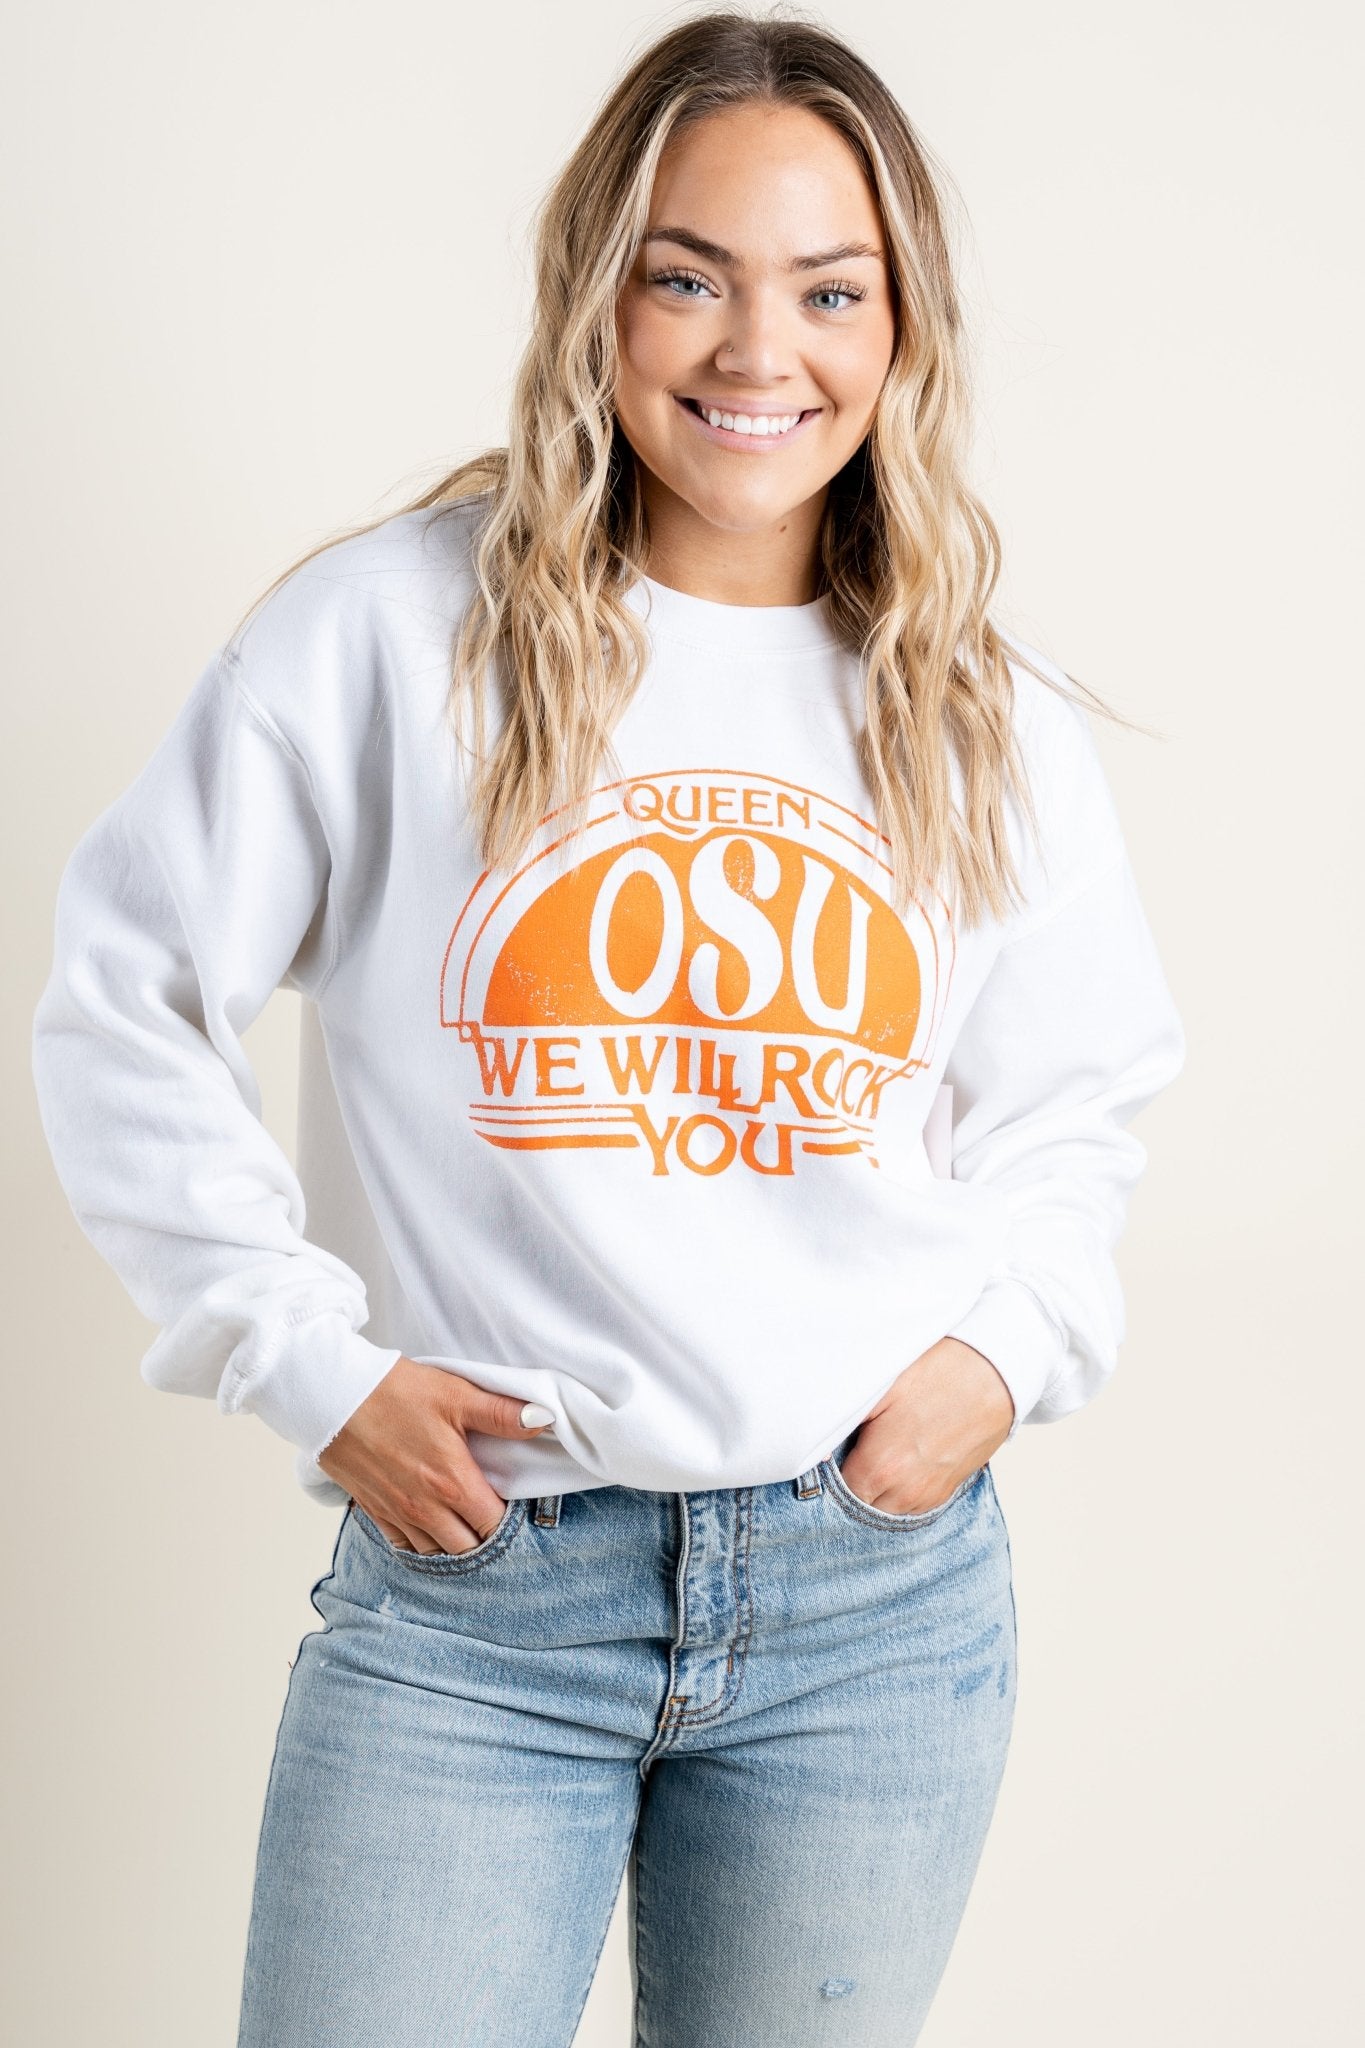 OSU Queen we will rock you sweatshirt white - Trendy Band T-Shirts and Sweatshirts at Lush Fashion Lounge Boutique in Oklahoma City